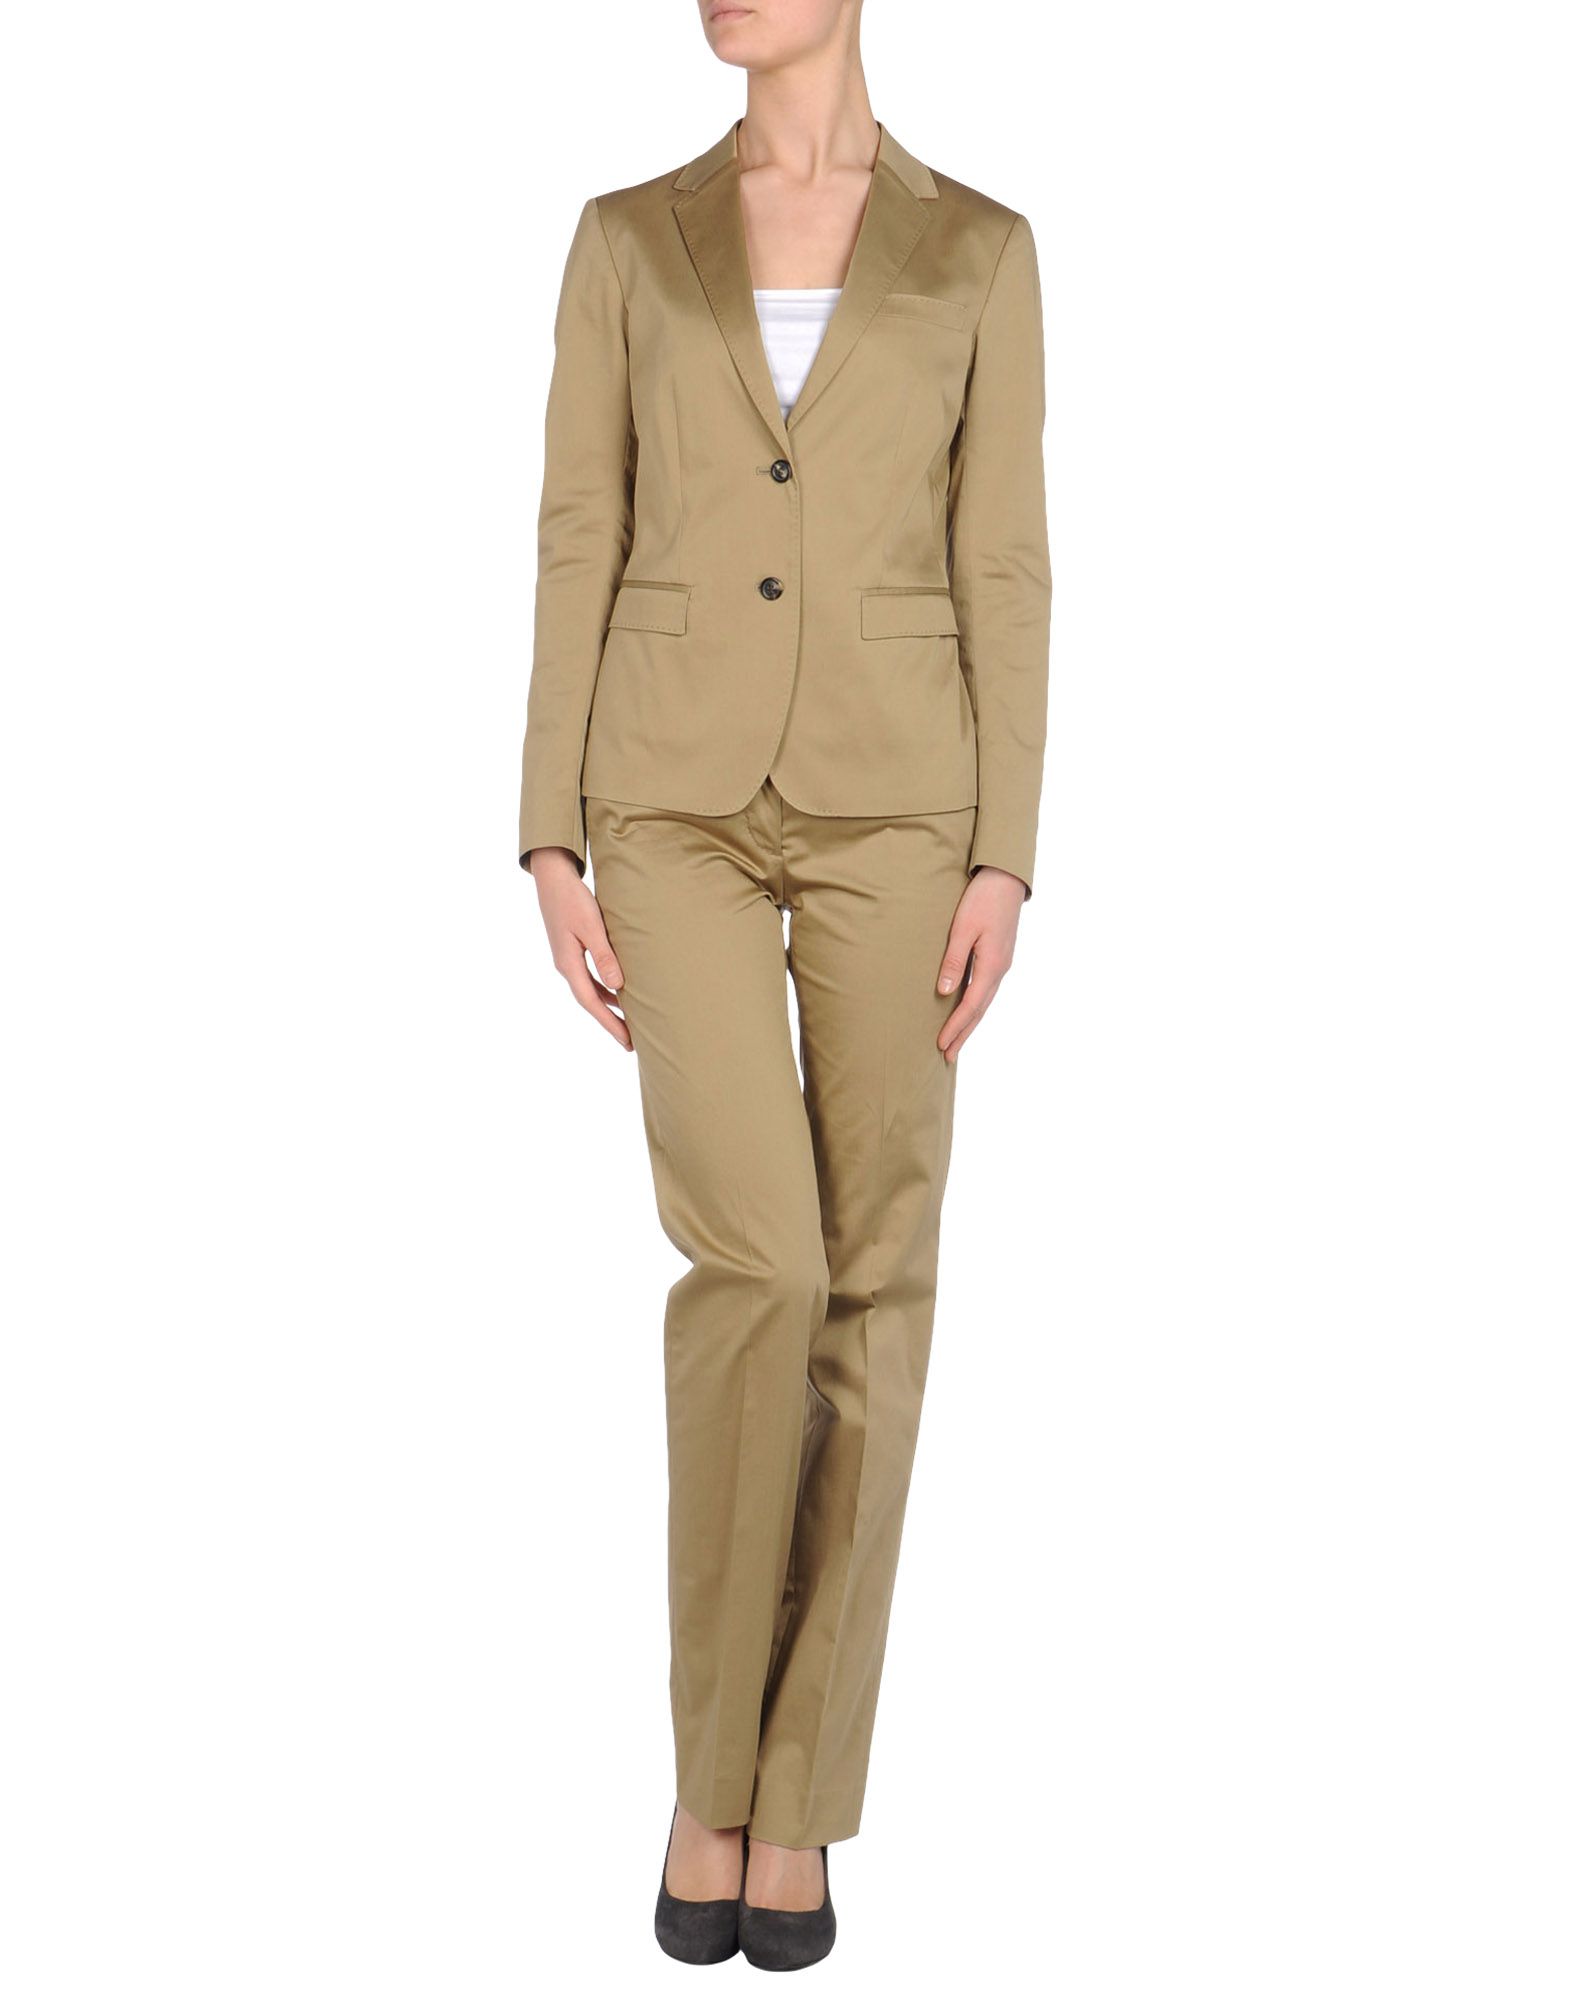 Mauro Grifoni Women'S Suit in Khaki (Military green) | Lyst